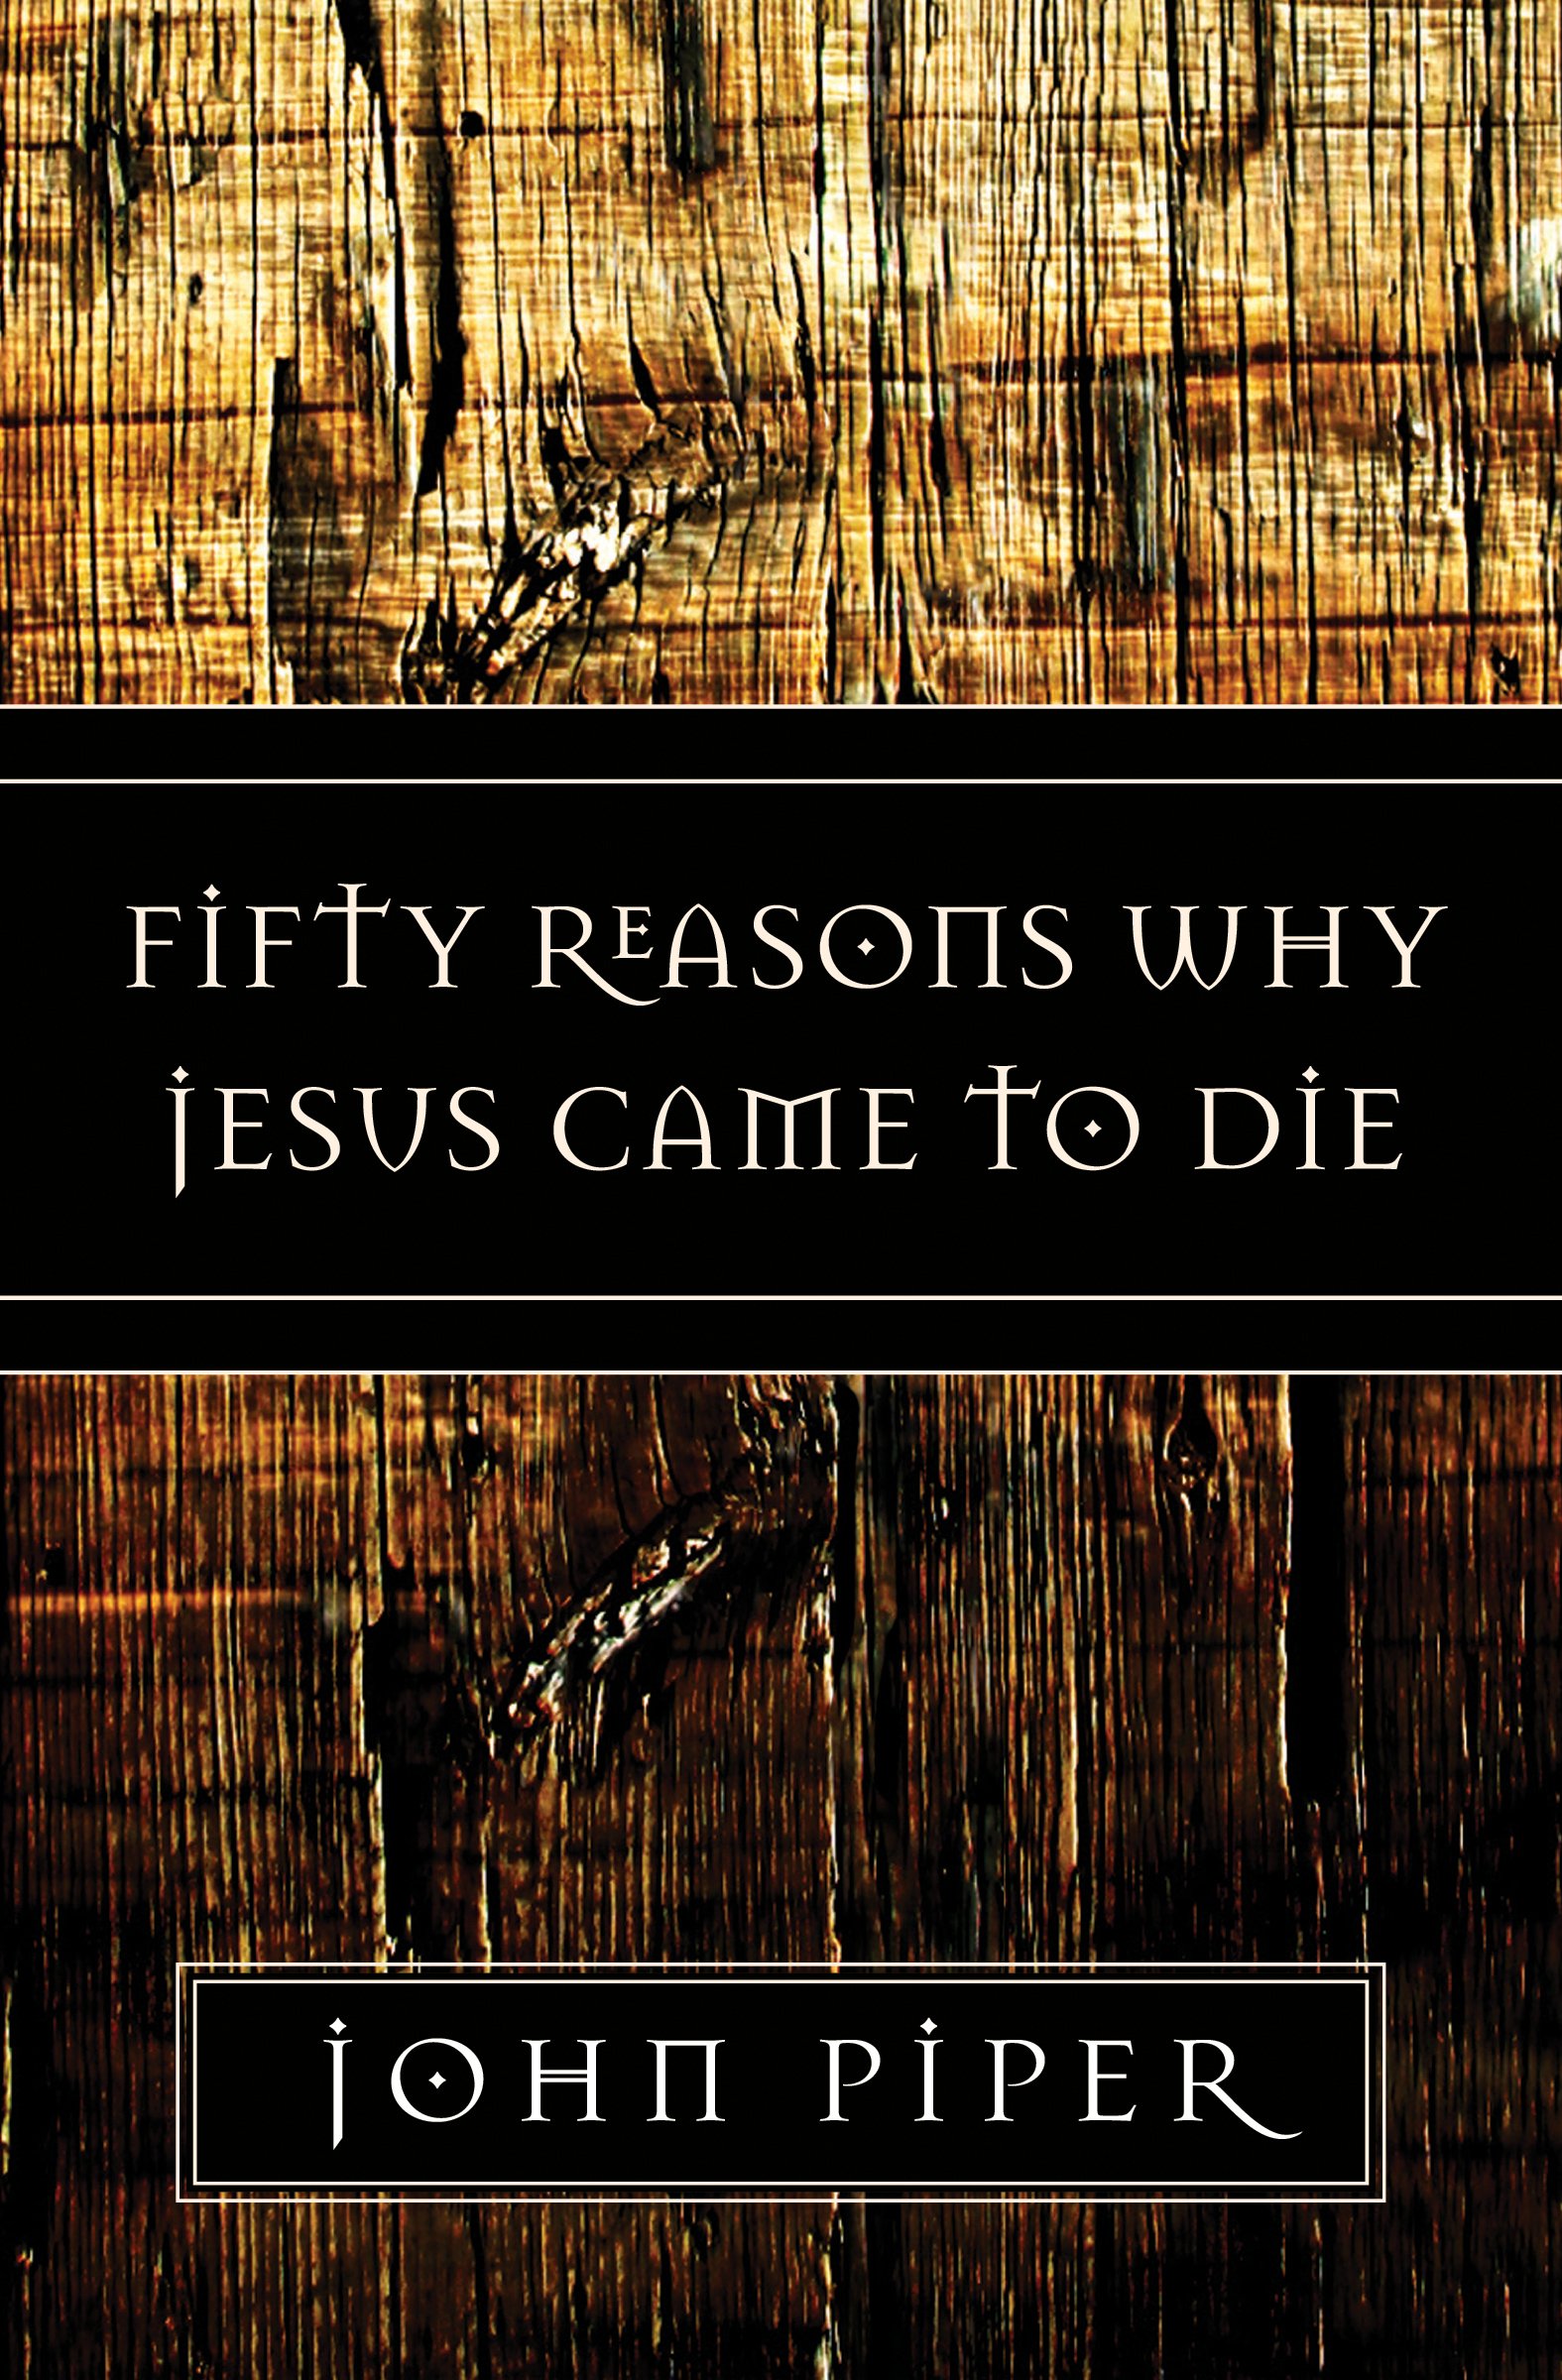 The Passion of Jesus Christ: 50 Reason Why He Came to Die.